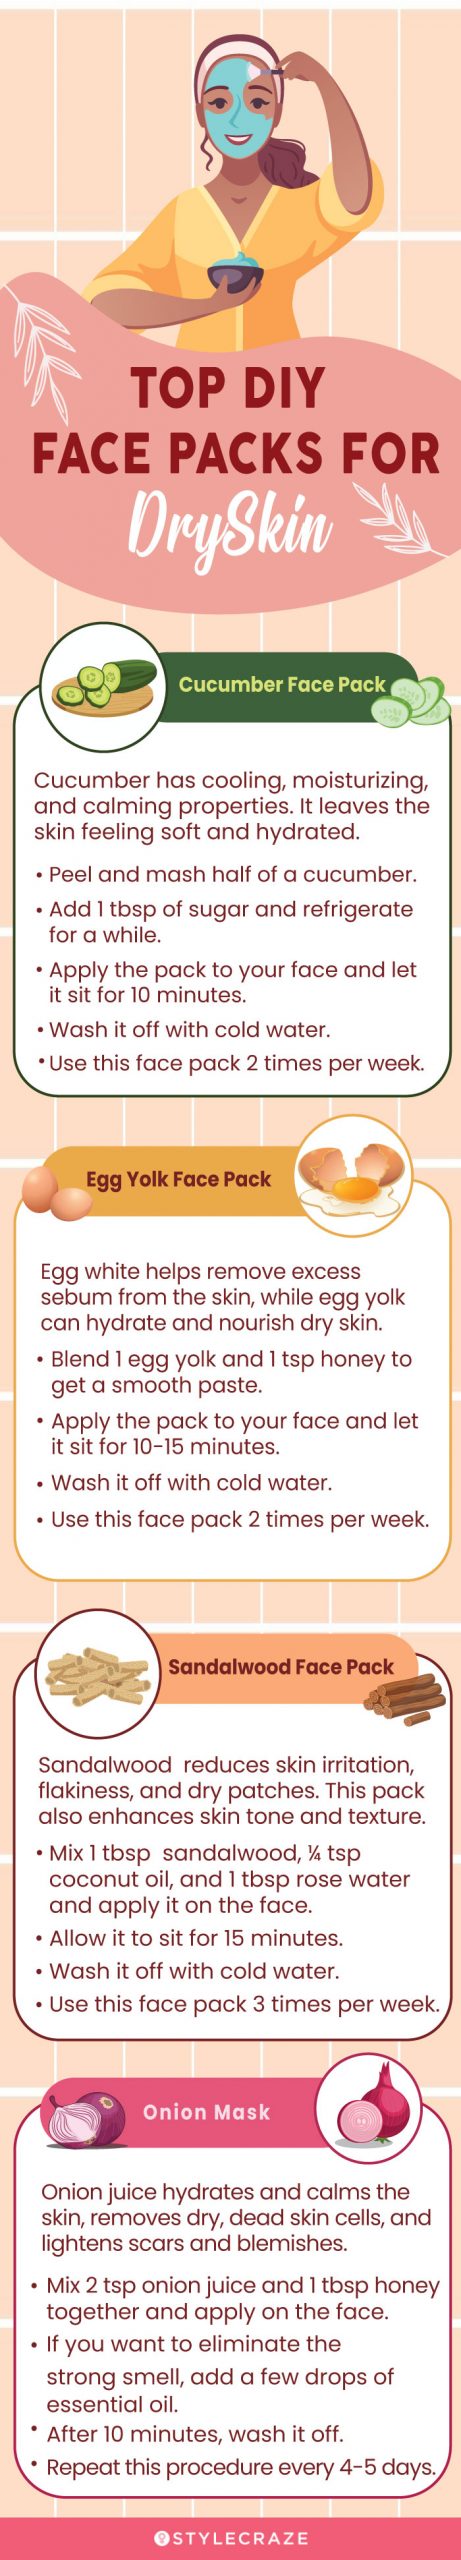 top diy face packs for dry skin (infographic)